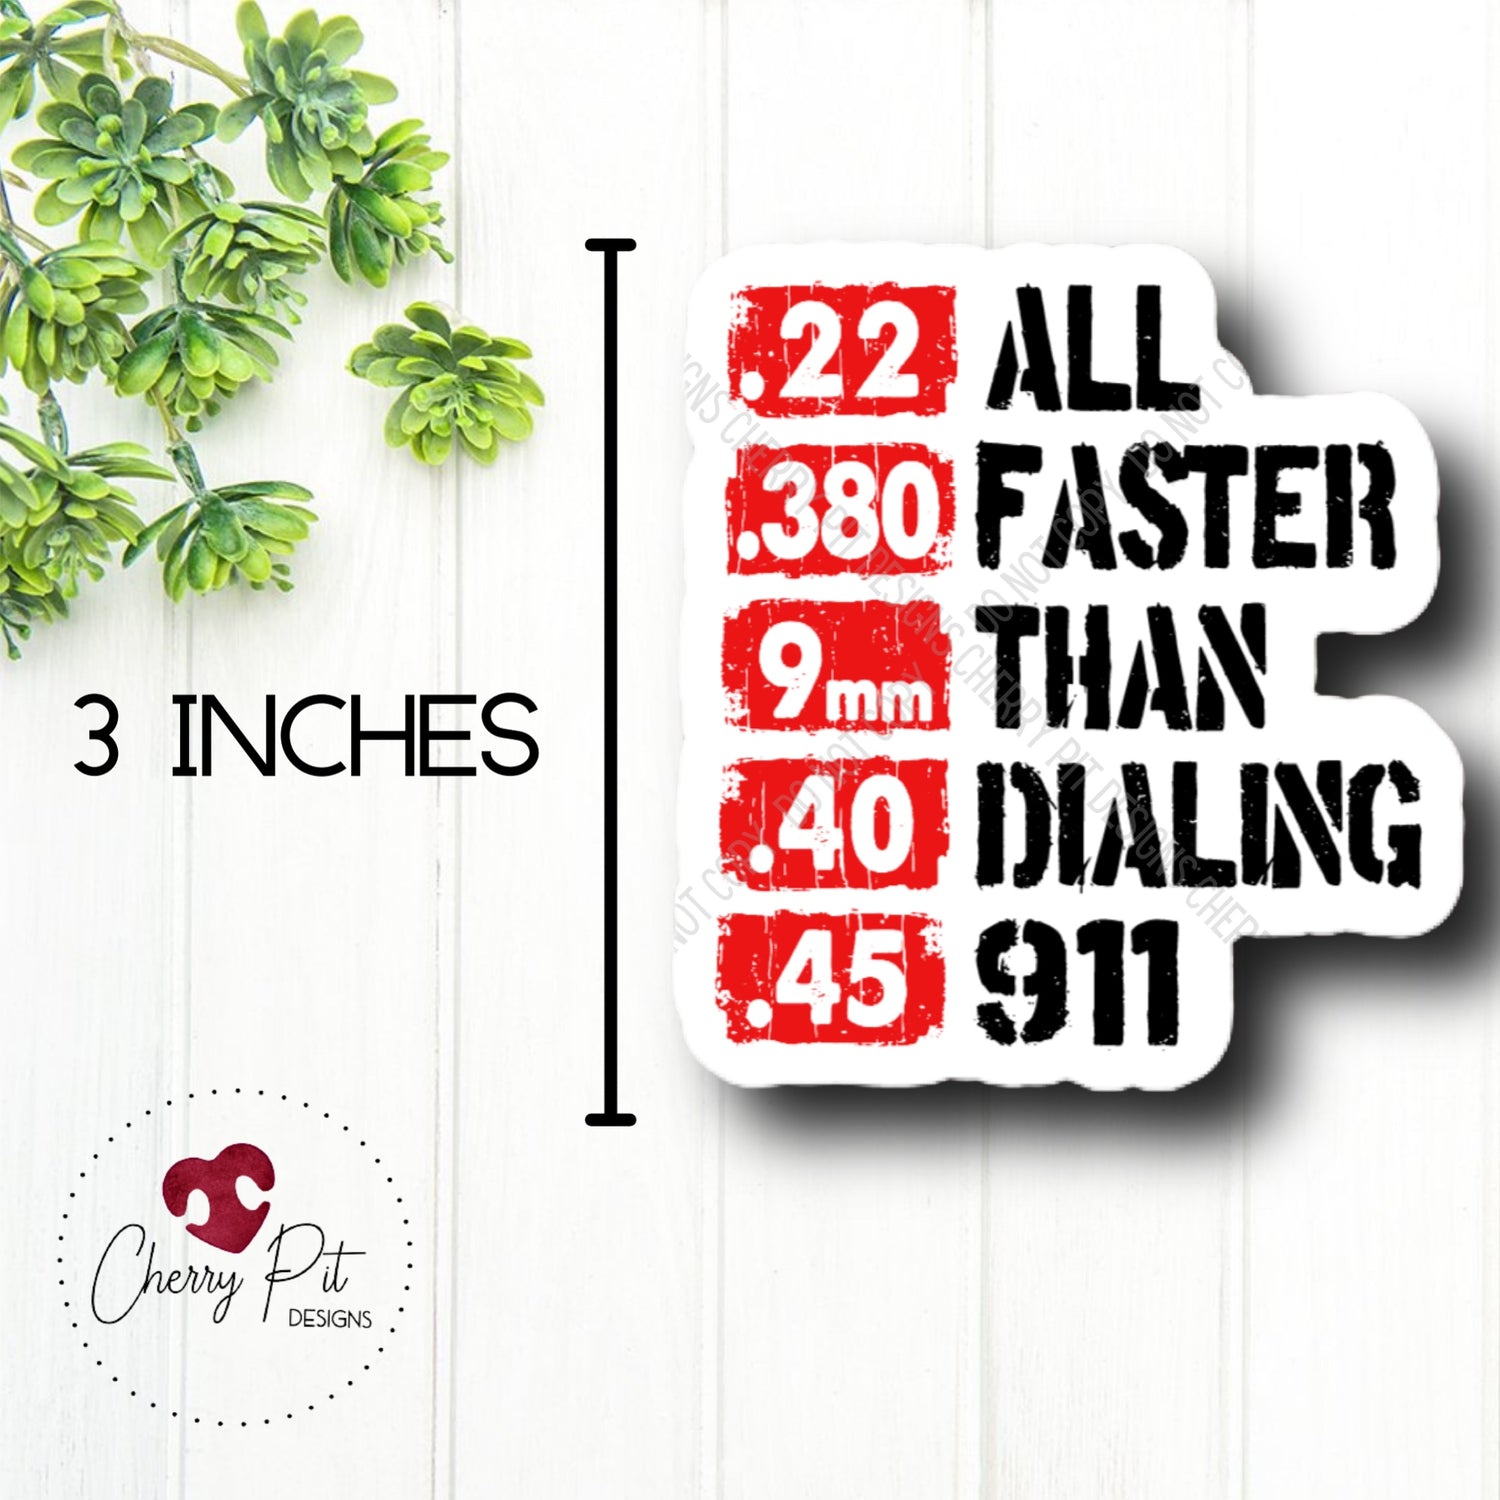 Faster Than Dialing 911 Vinyl Sticker Decal - Cherry Pit Designs